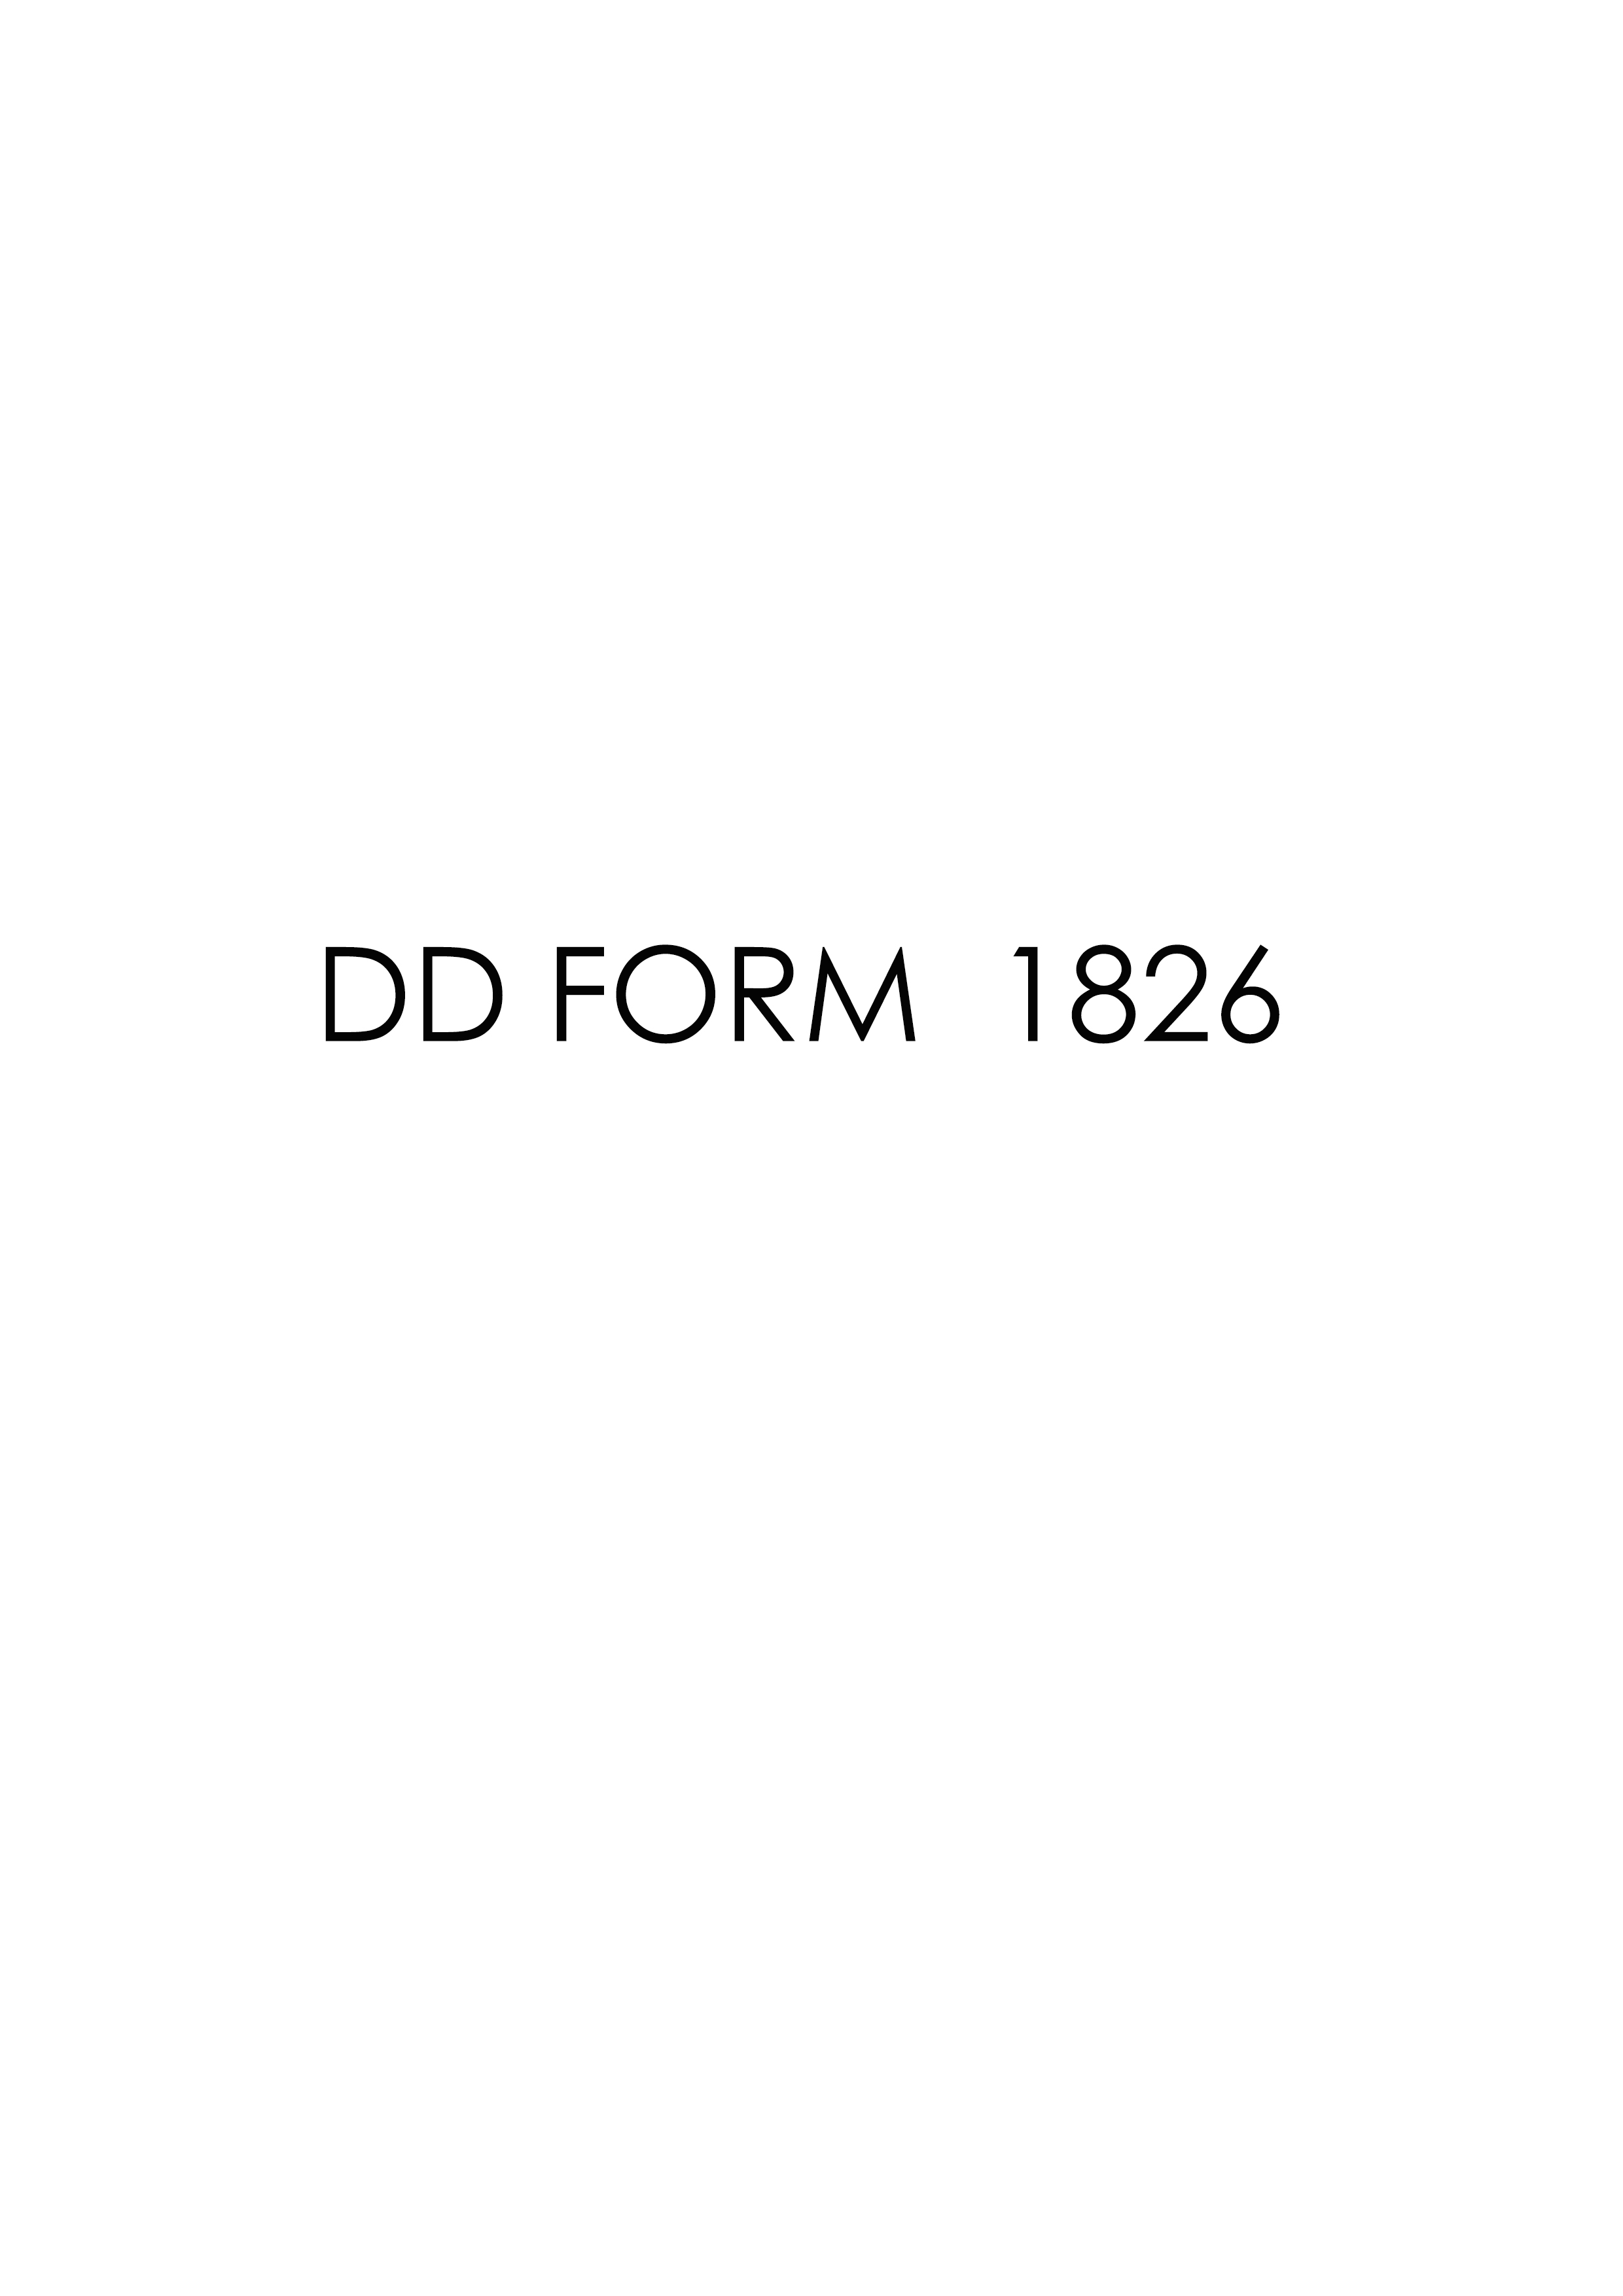 Download Fillable dd Form 1826